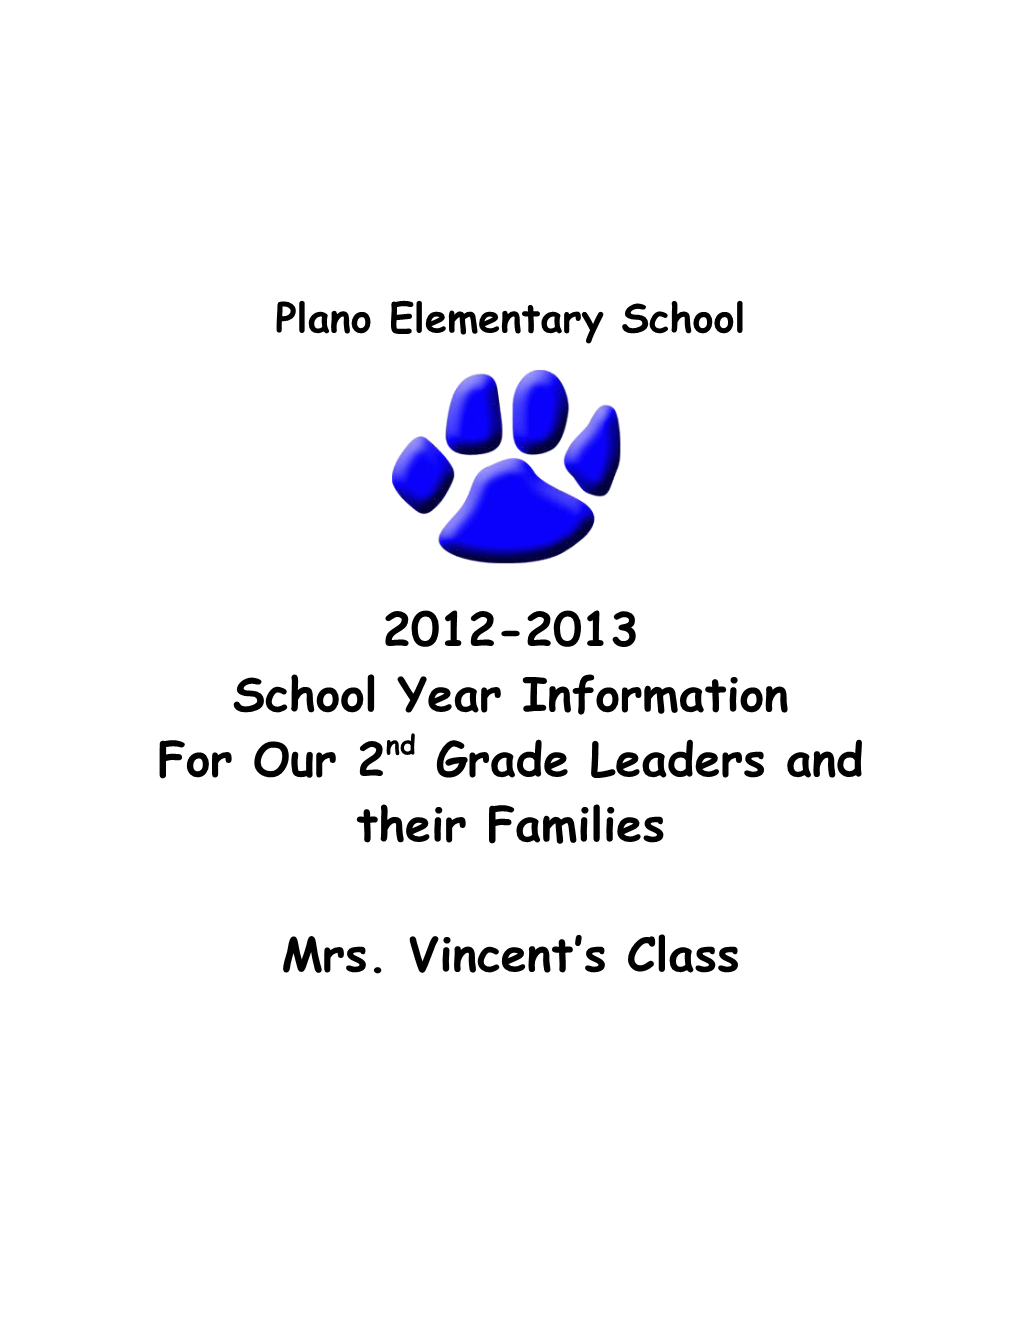 For Our 2Nd Grade Leaders and Their Families